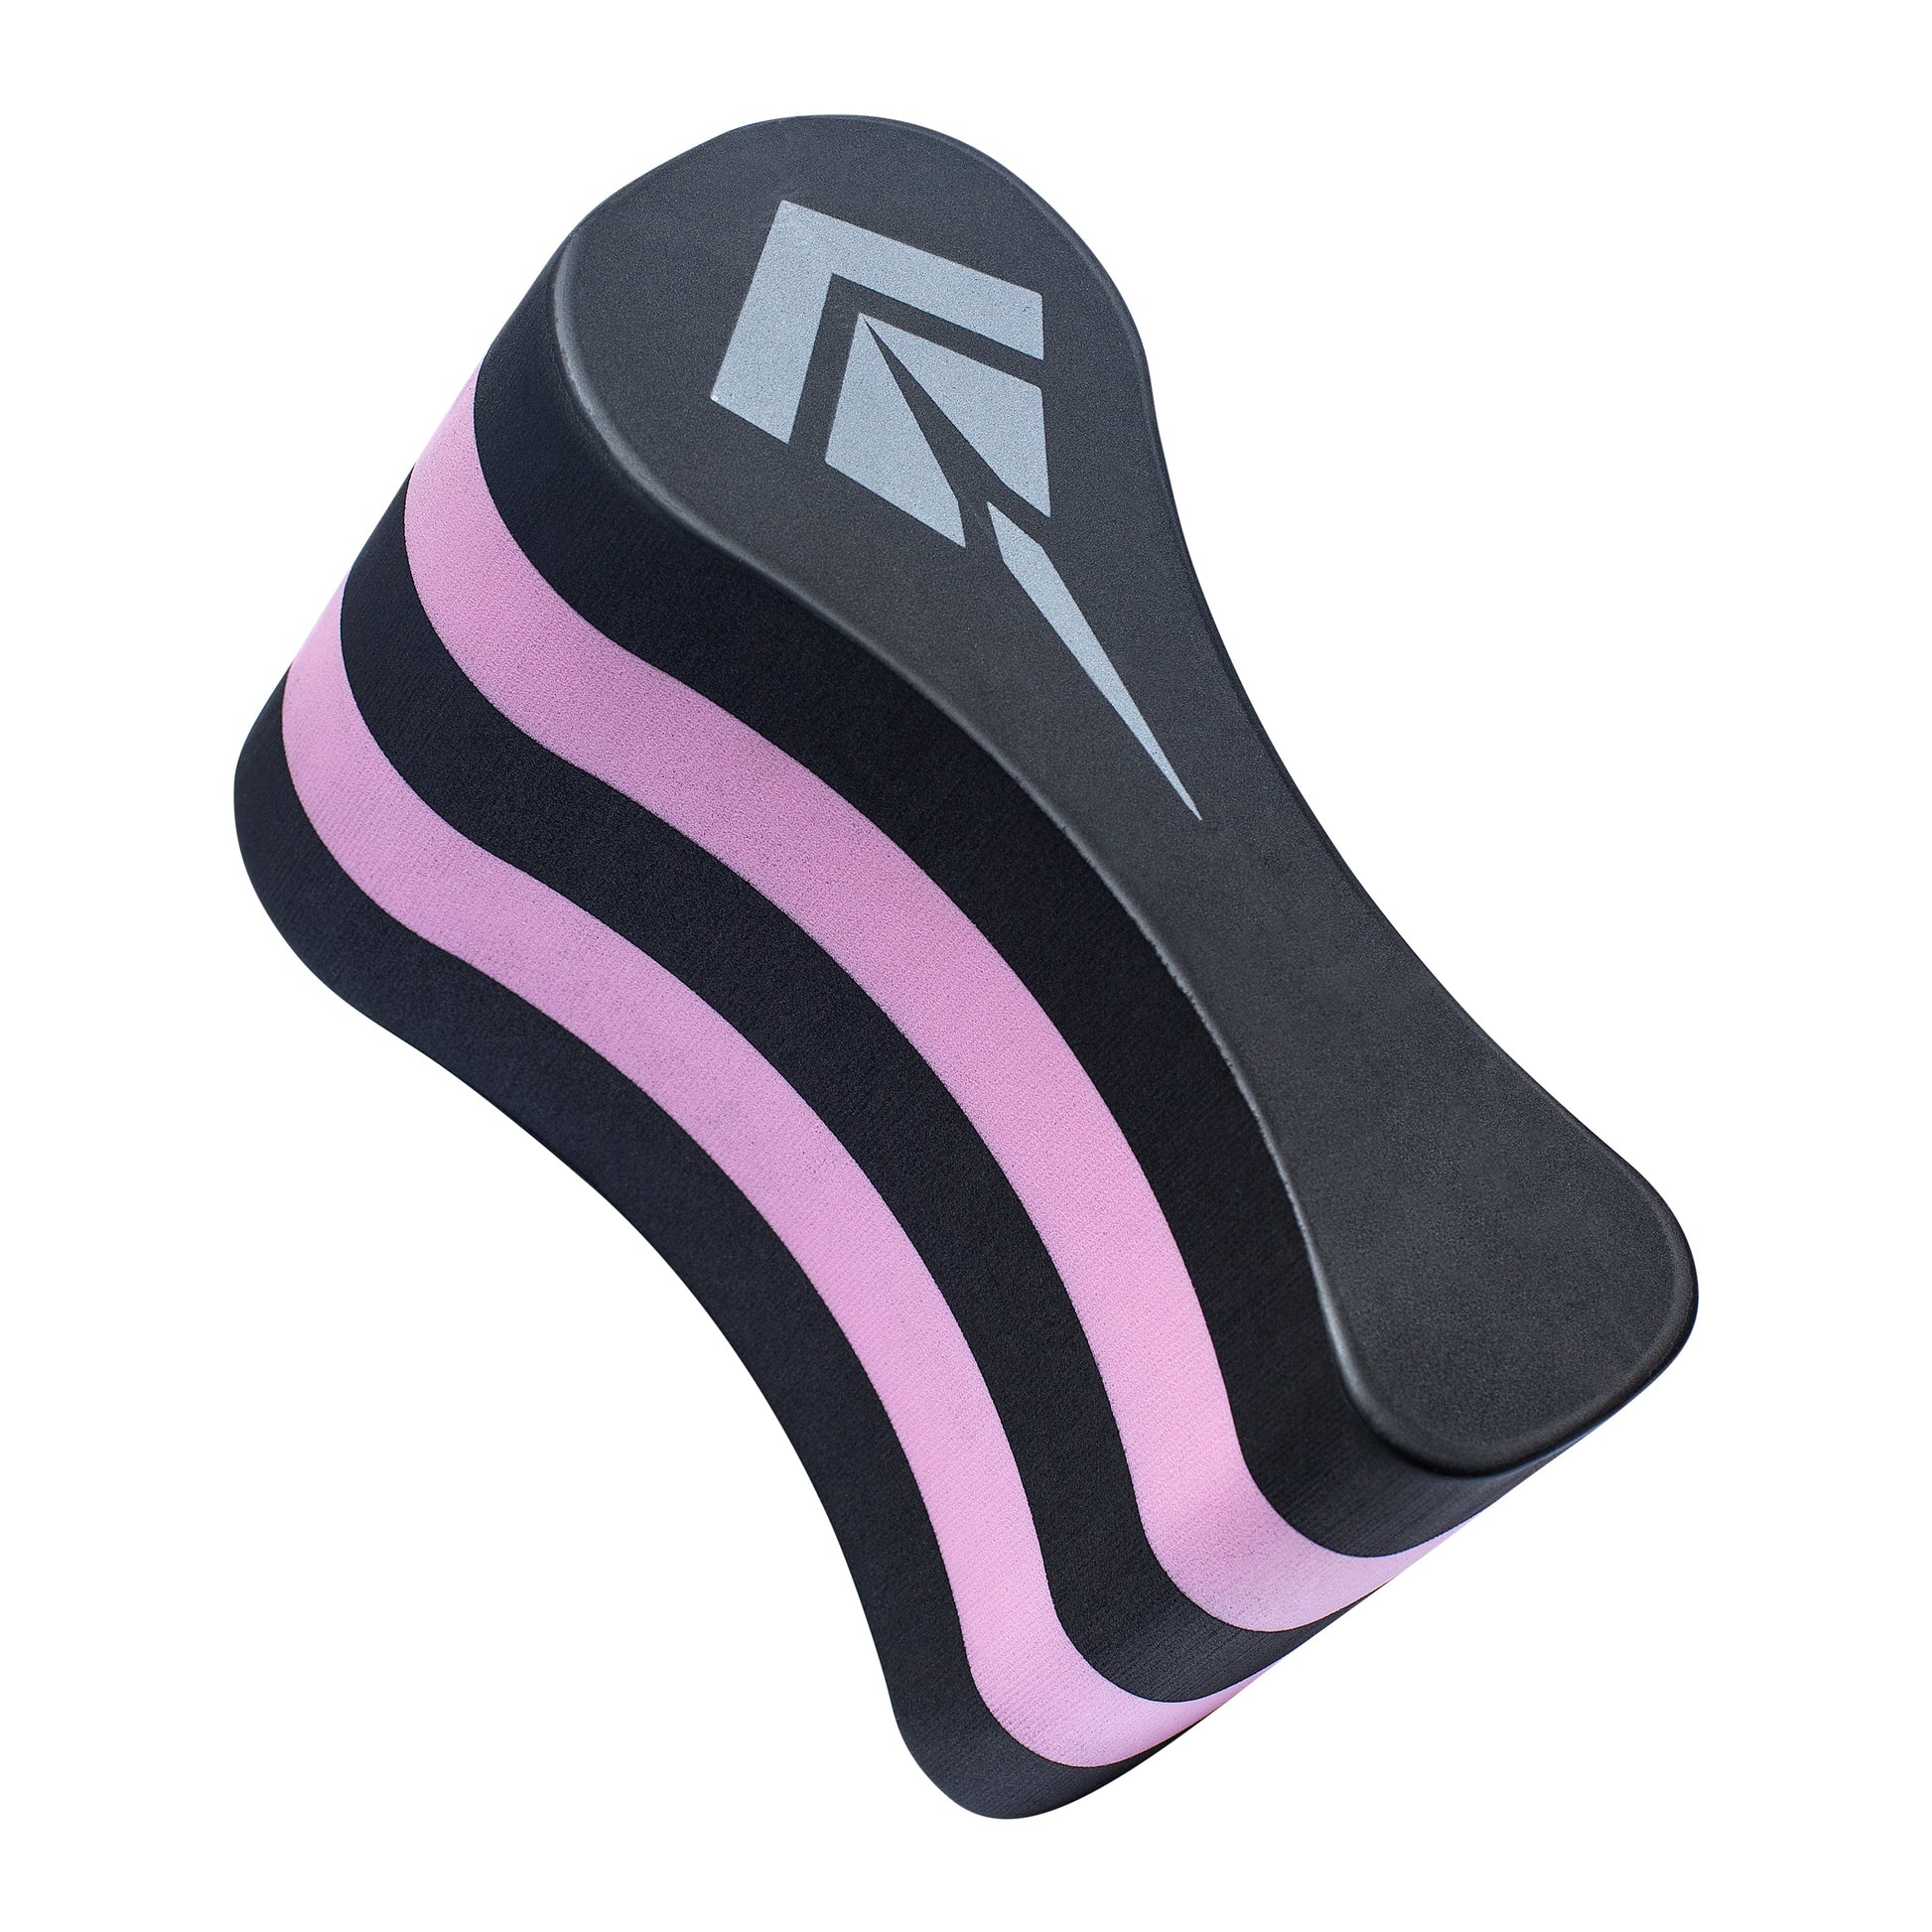 STINGRAY LARGE PULL BUOY FOR SWIMMING | BLACK/PINK